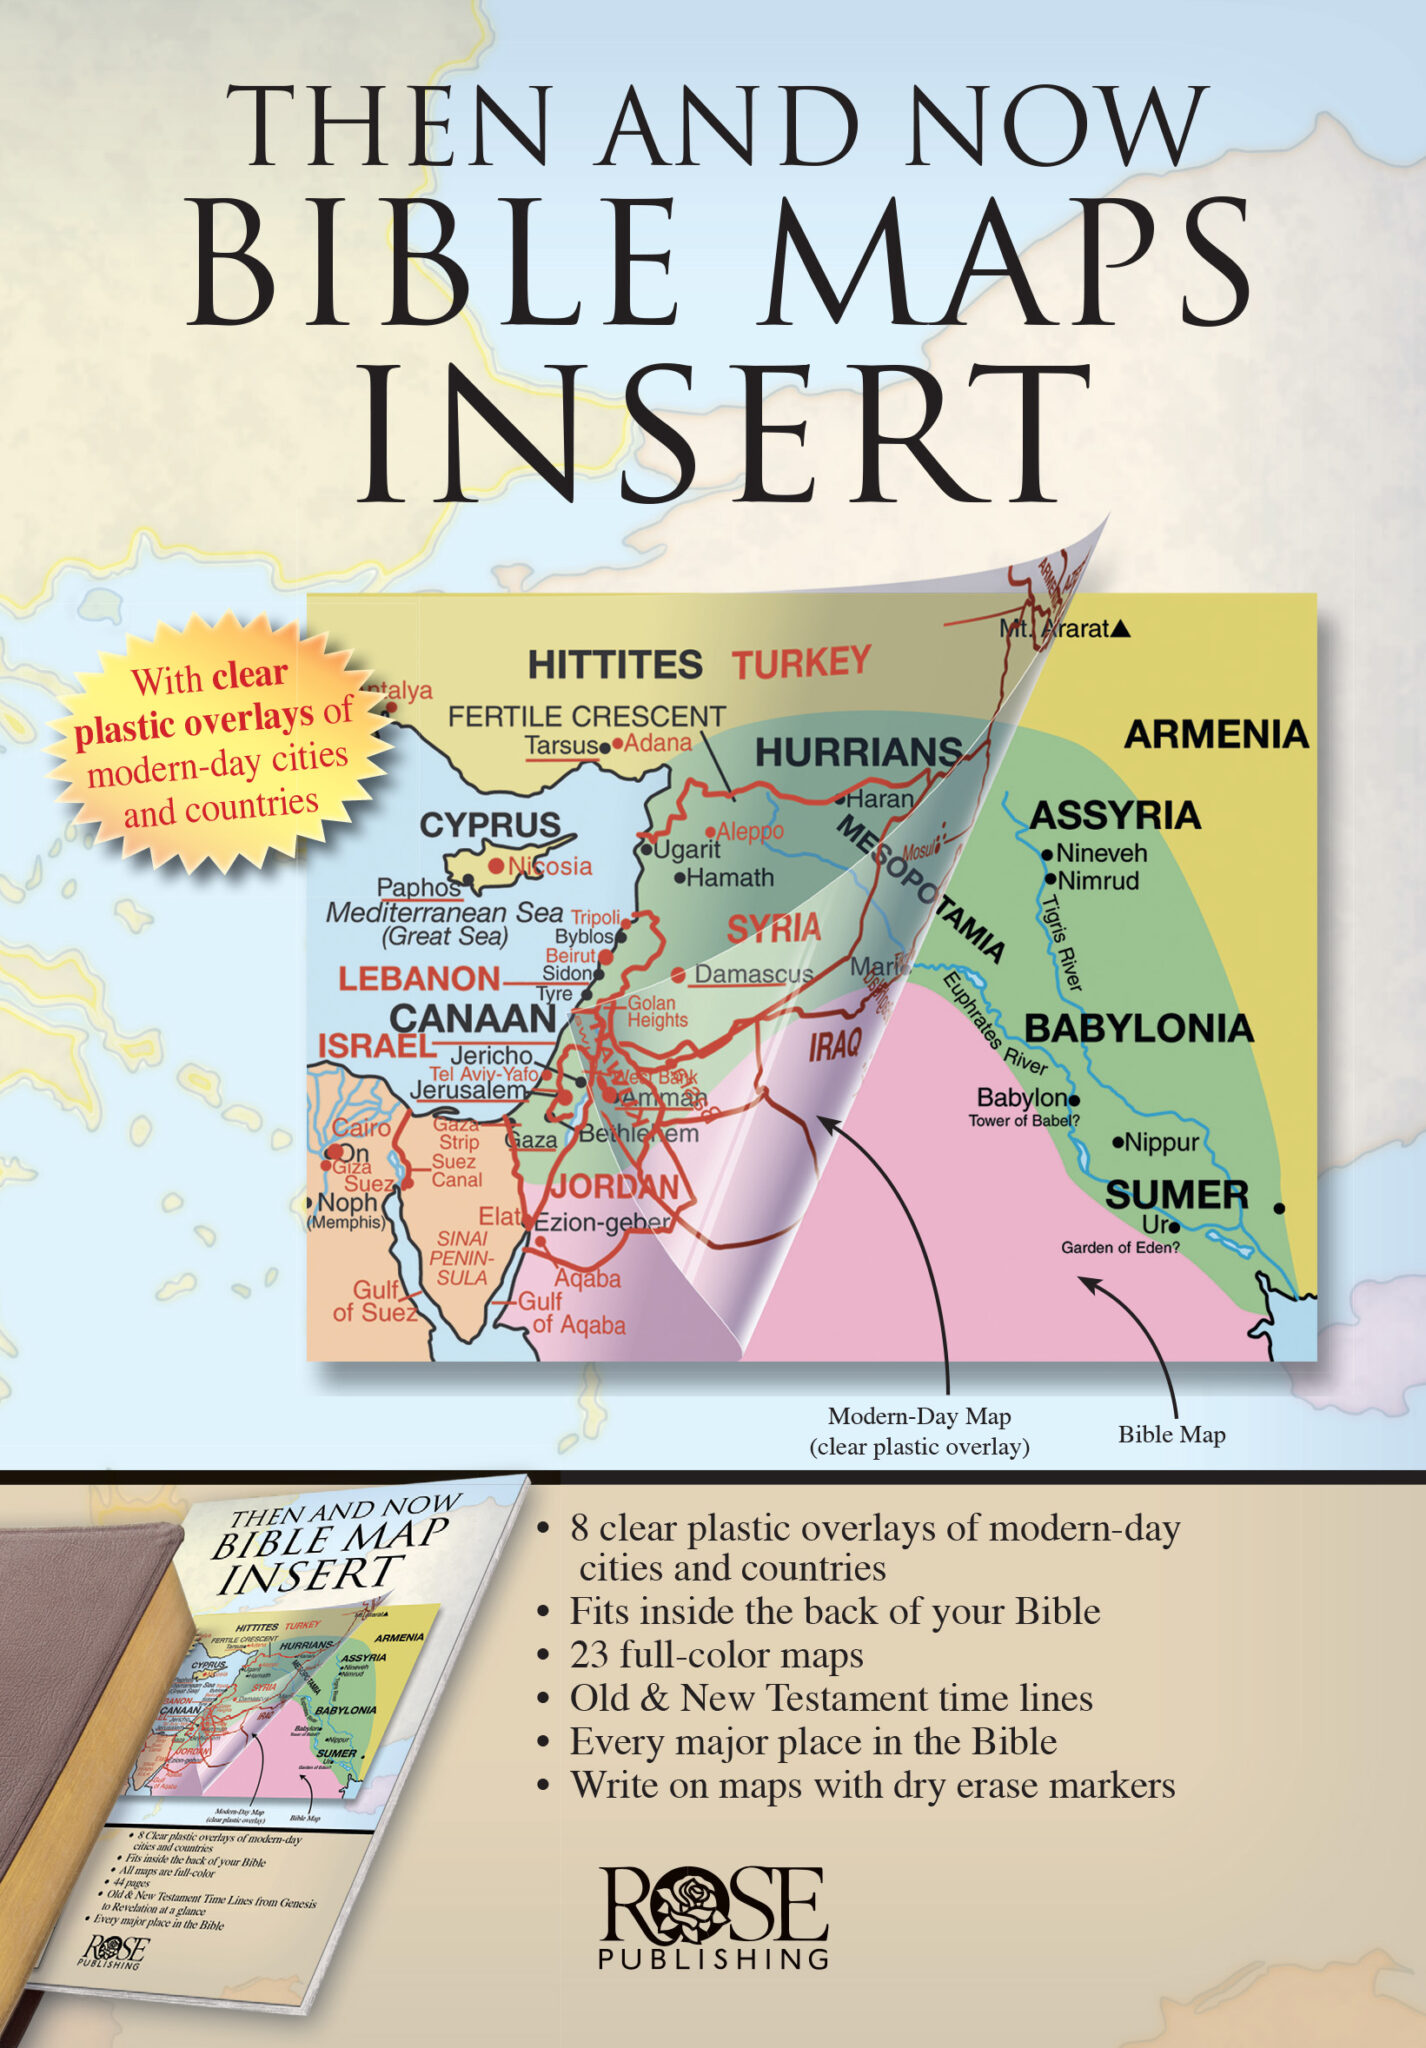 rose-then-and-now-bible-map-insert-vs-sonlight-bible-map-insert-rose